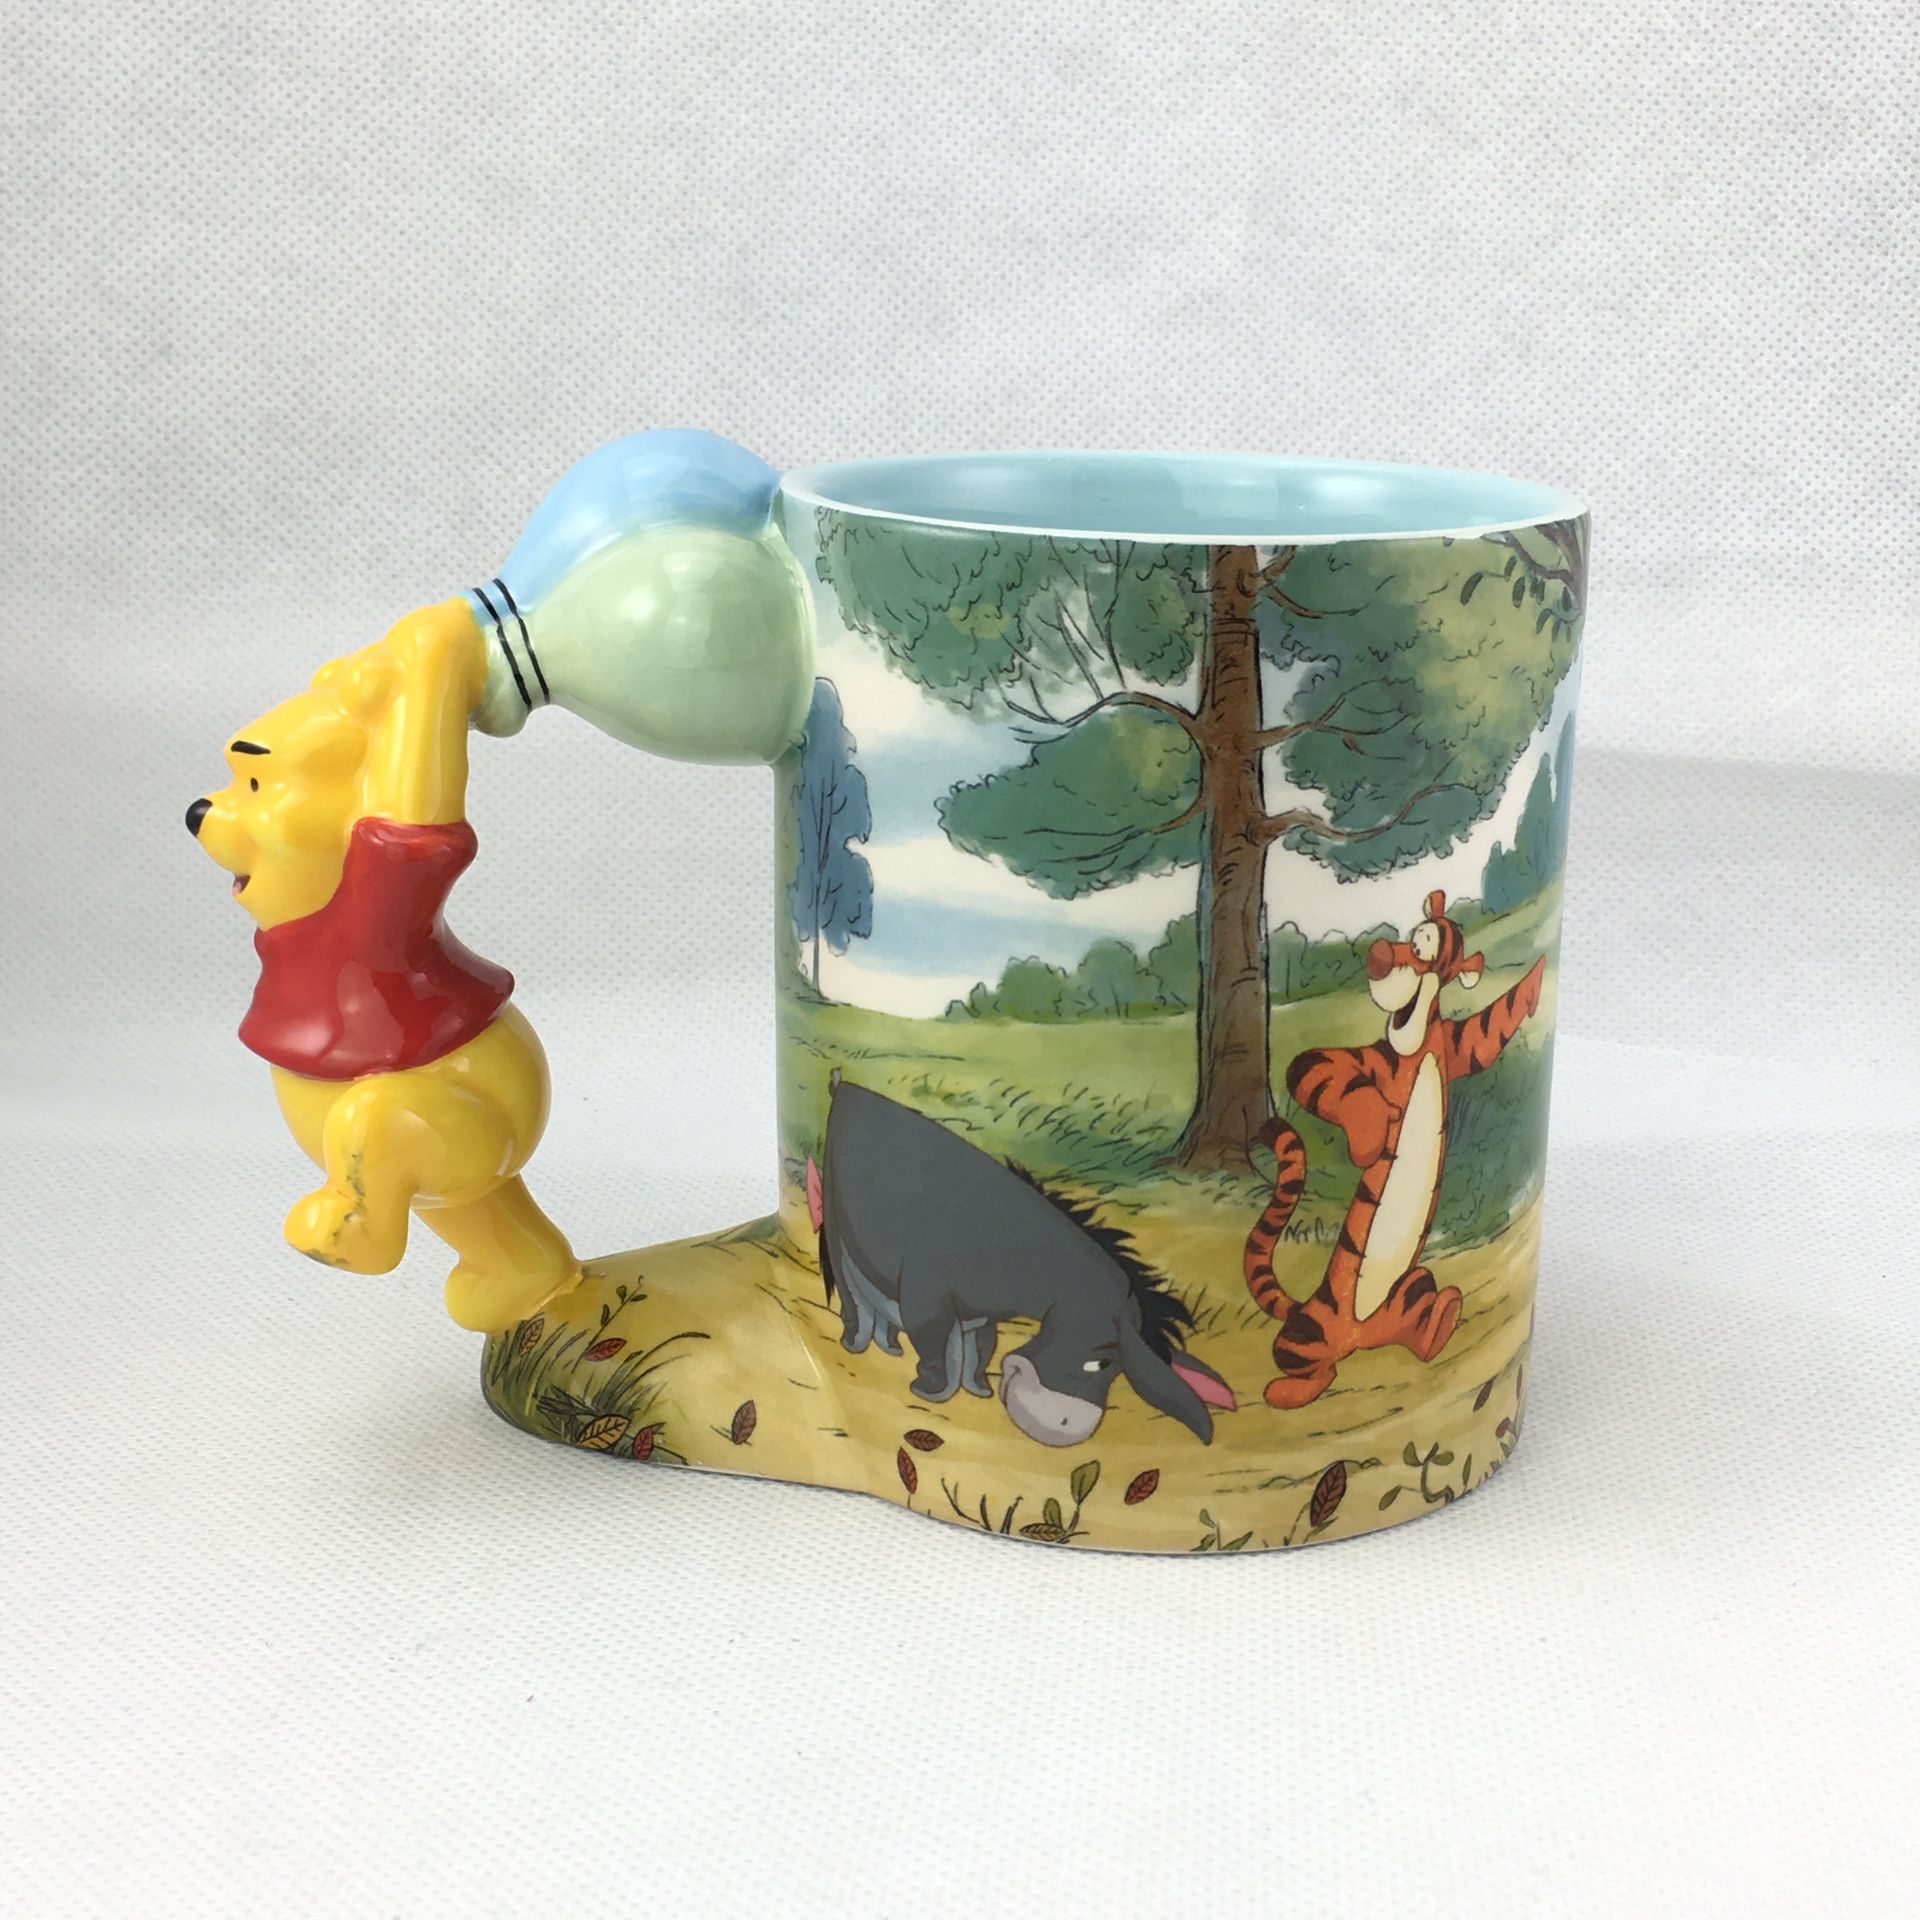 Disney Winnie the Pooh collectible mug small crazing fracture in foot but not broken